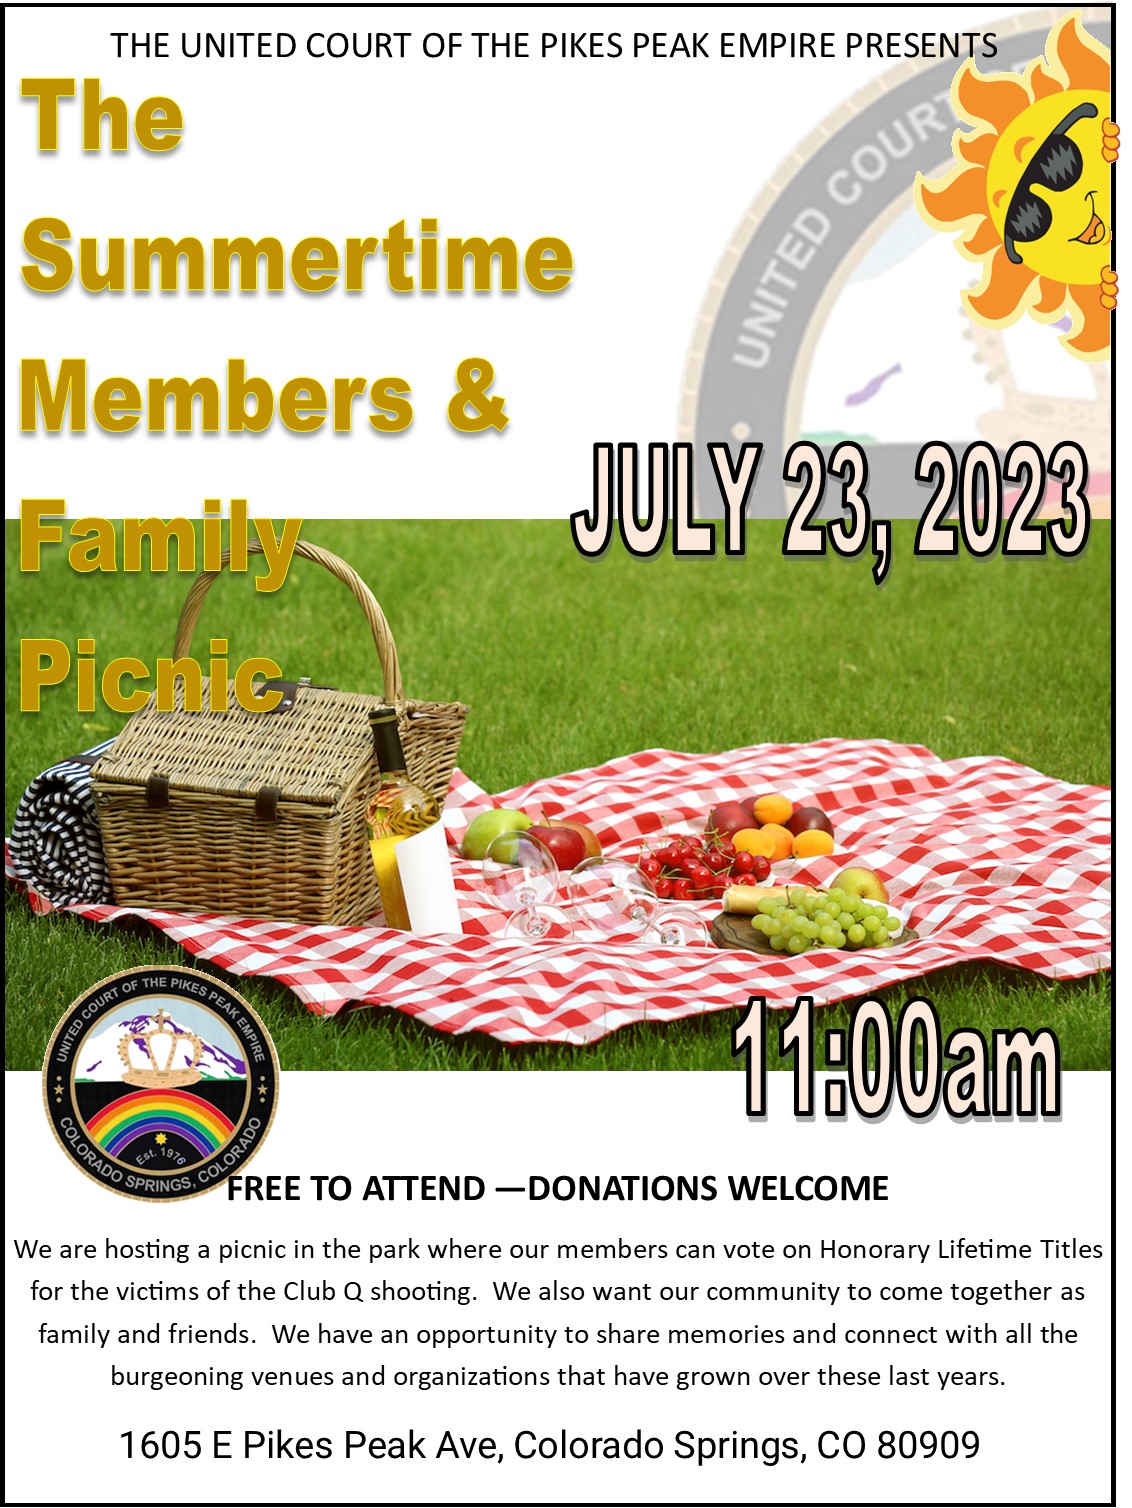 the summertime members and family picnic 07-23-2023